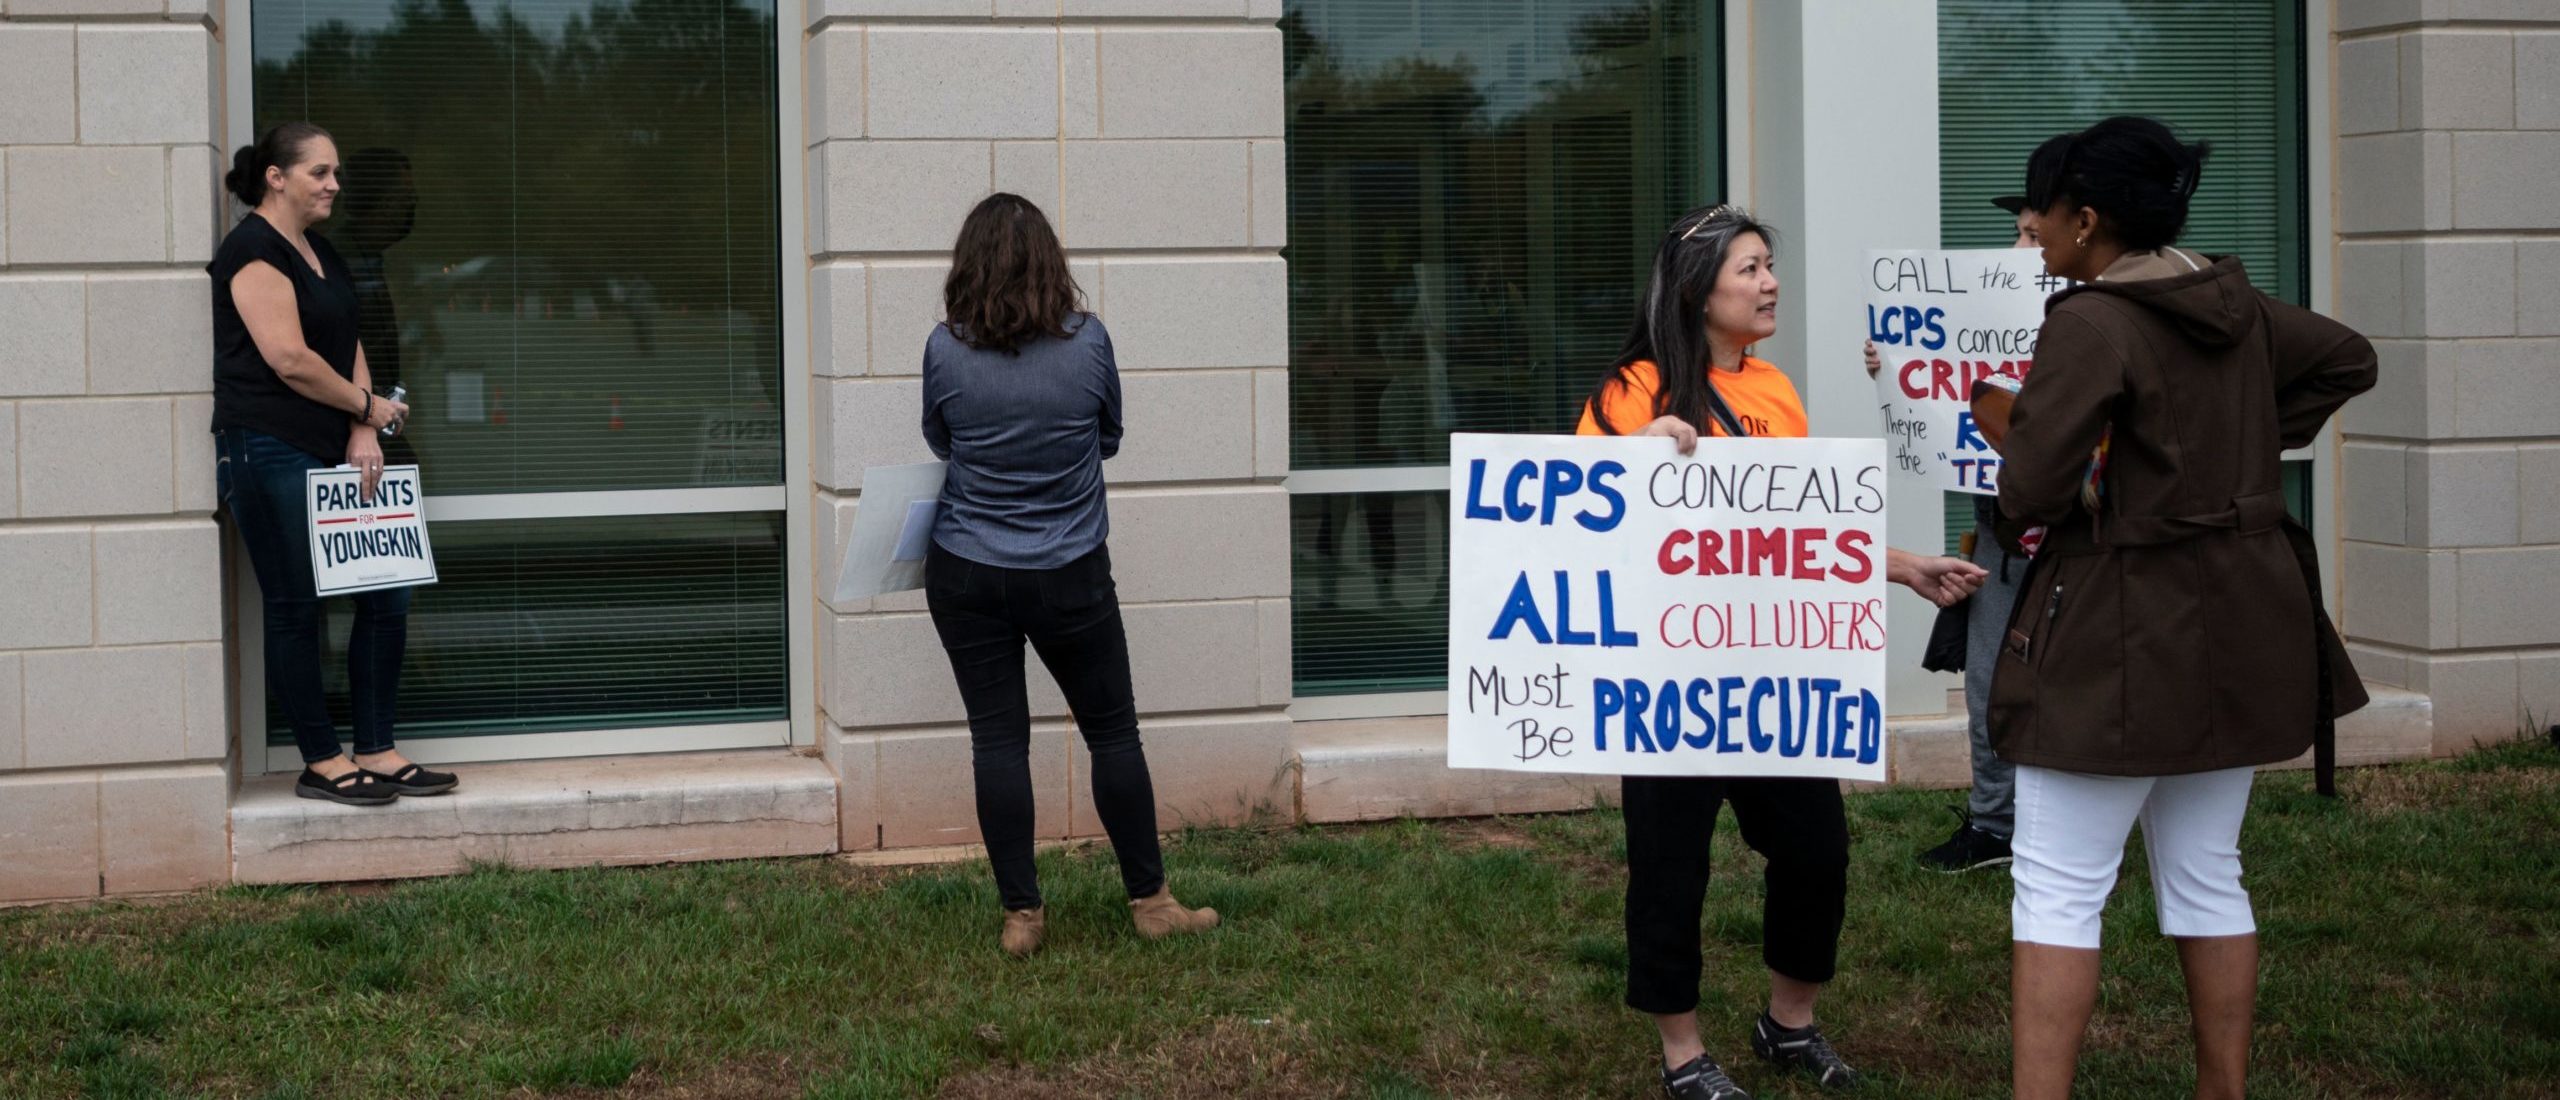 Protesters and activists hold signs as they stand outside a Loudoun County Public Schools (LCPS) board meeting in Ashburn, Virginia on October 12, 2021. (Photo by ANDREW CABALLERO-REYNOLDS/AFP via Getty Images)